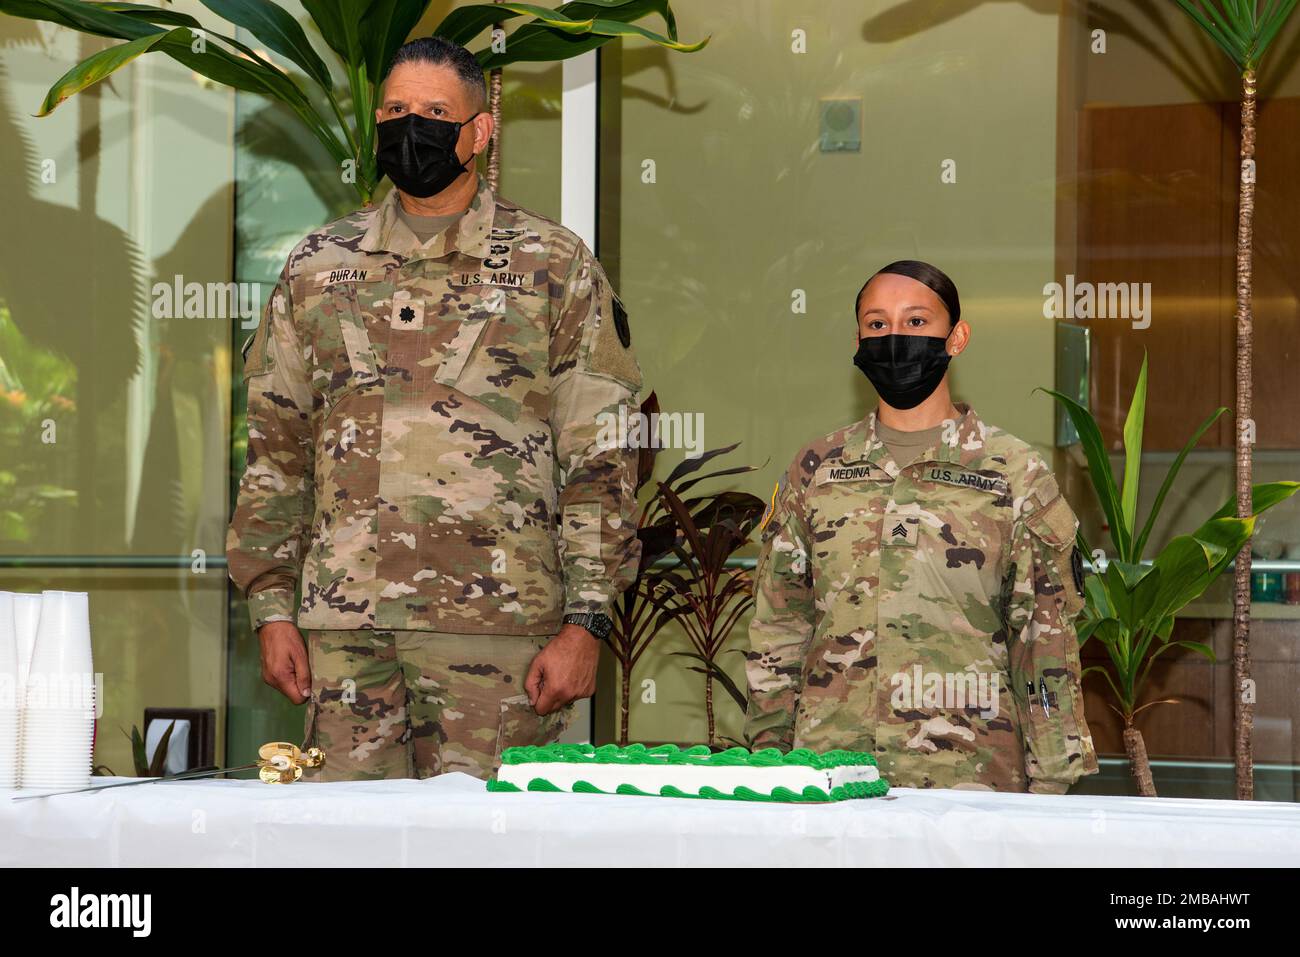 Lt. Col. Alex Duran and Sgt. Janice Medina, the oldest and youngest soldier attached to the Defense POW/MIA Accounting Agency cut the cake in a ceremony for the 247th Army birthday at the DPAA Facility on Joint Base Pearl Harbor-Hickam, Hawaii, June 14, 2022. The ceremony was held to commemorate the Army birthday honoring 247 years of rich history and defense of the nation. DPAA's mission is to achieve the fullest possible accounting for missing and unaccounted for U.S. personnel to their families and our nation. Stock Photo